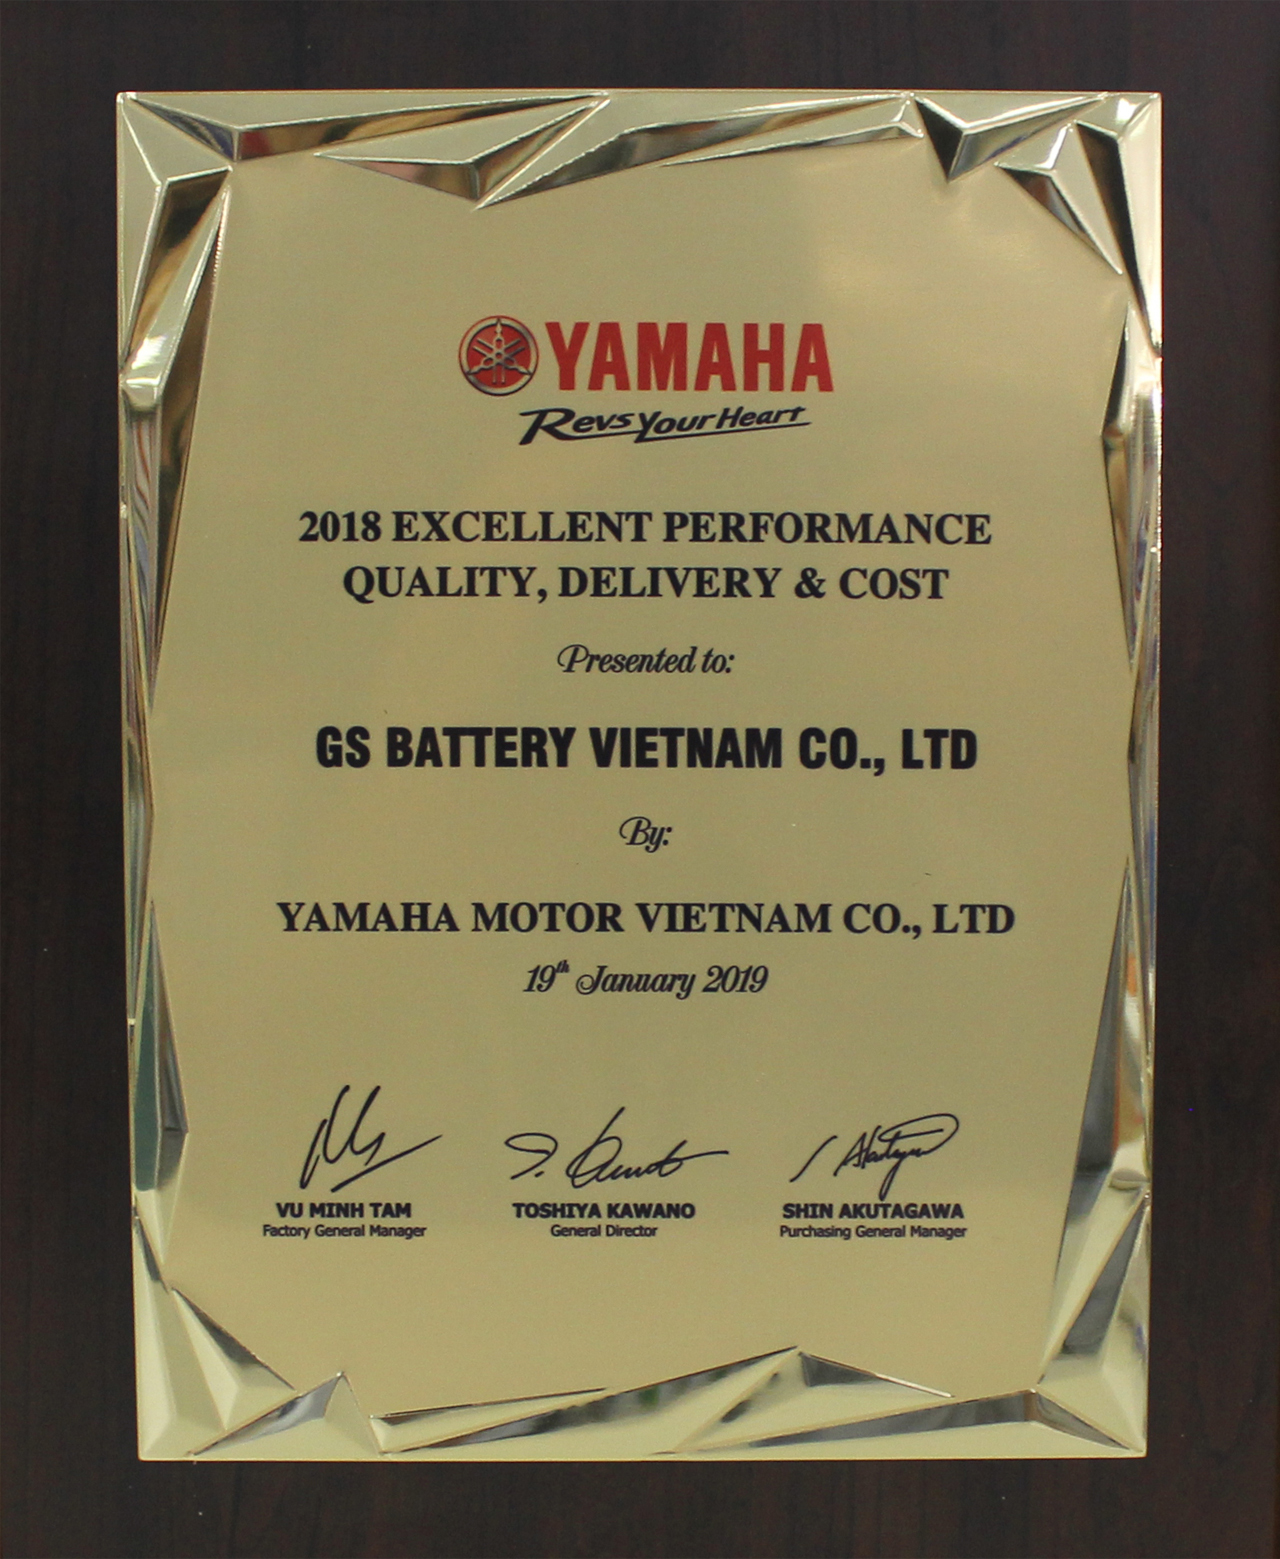 GSV WAS HONORLY AWARDED THE CERTIFICATE FOR “2018 EXCELLENT PERFORMANCE QUALITY, DELIVERY & COST” BY YAMAHA MOTOR VIETNAM